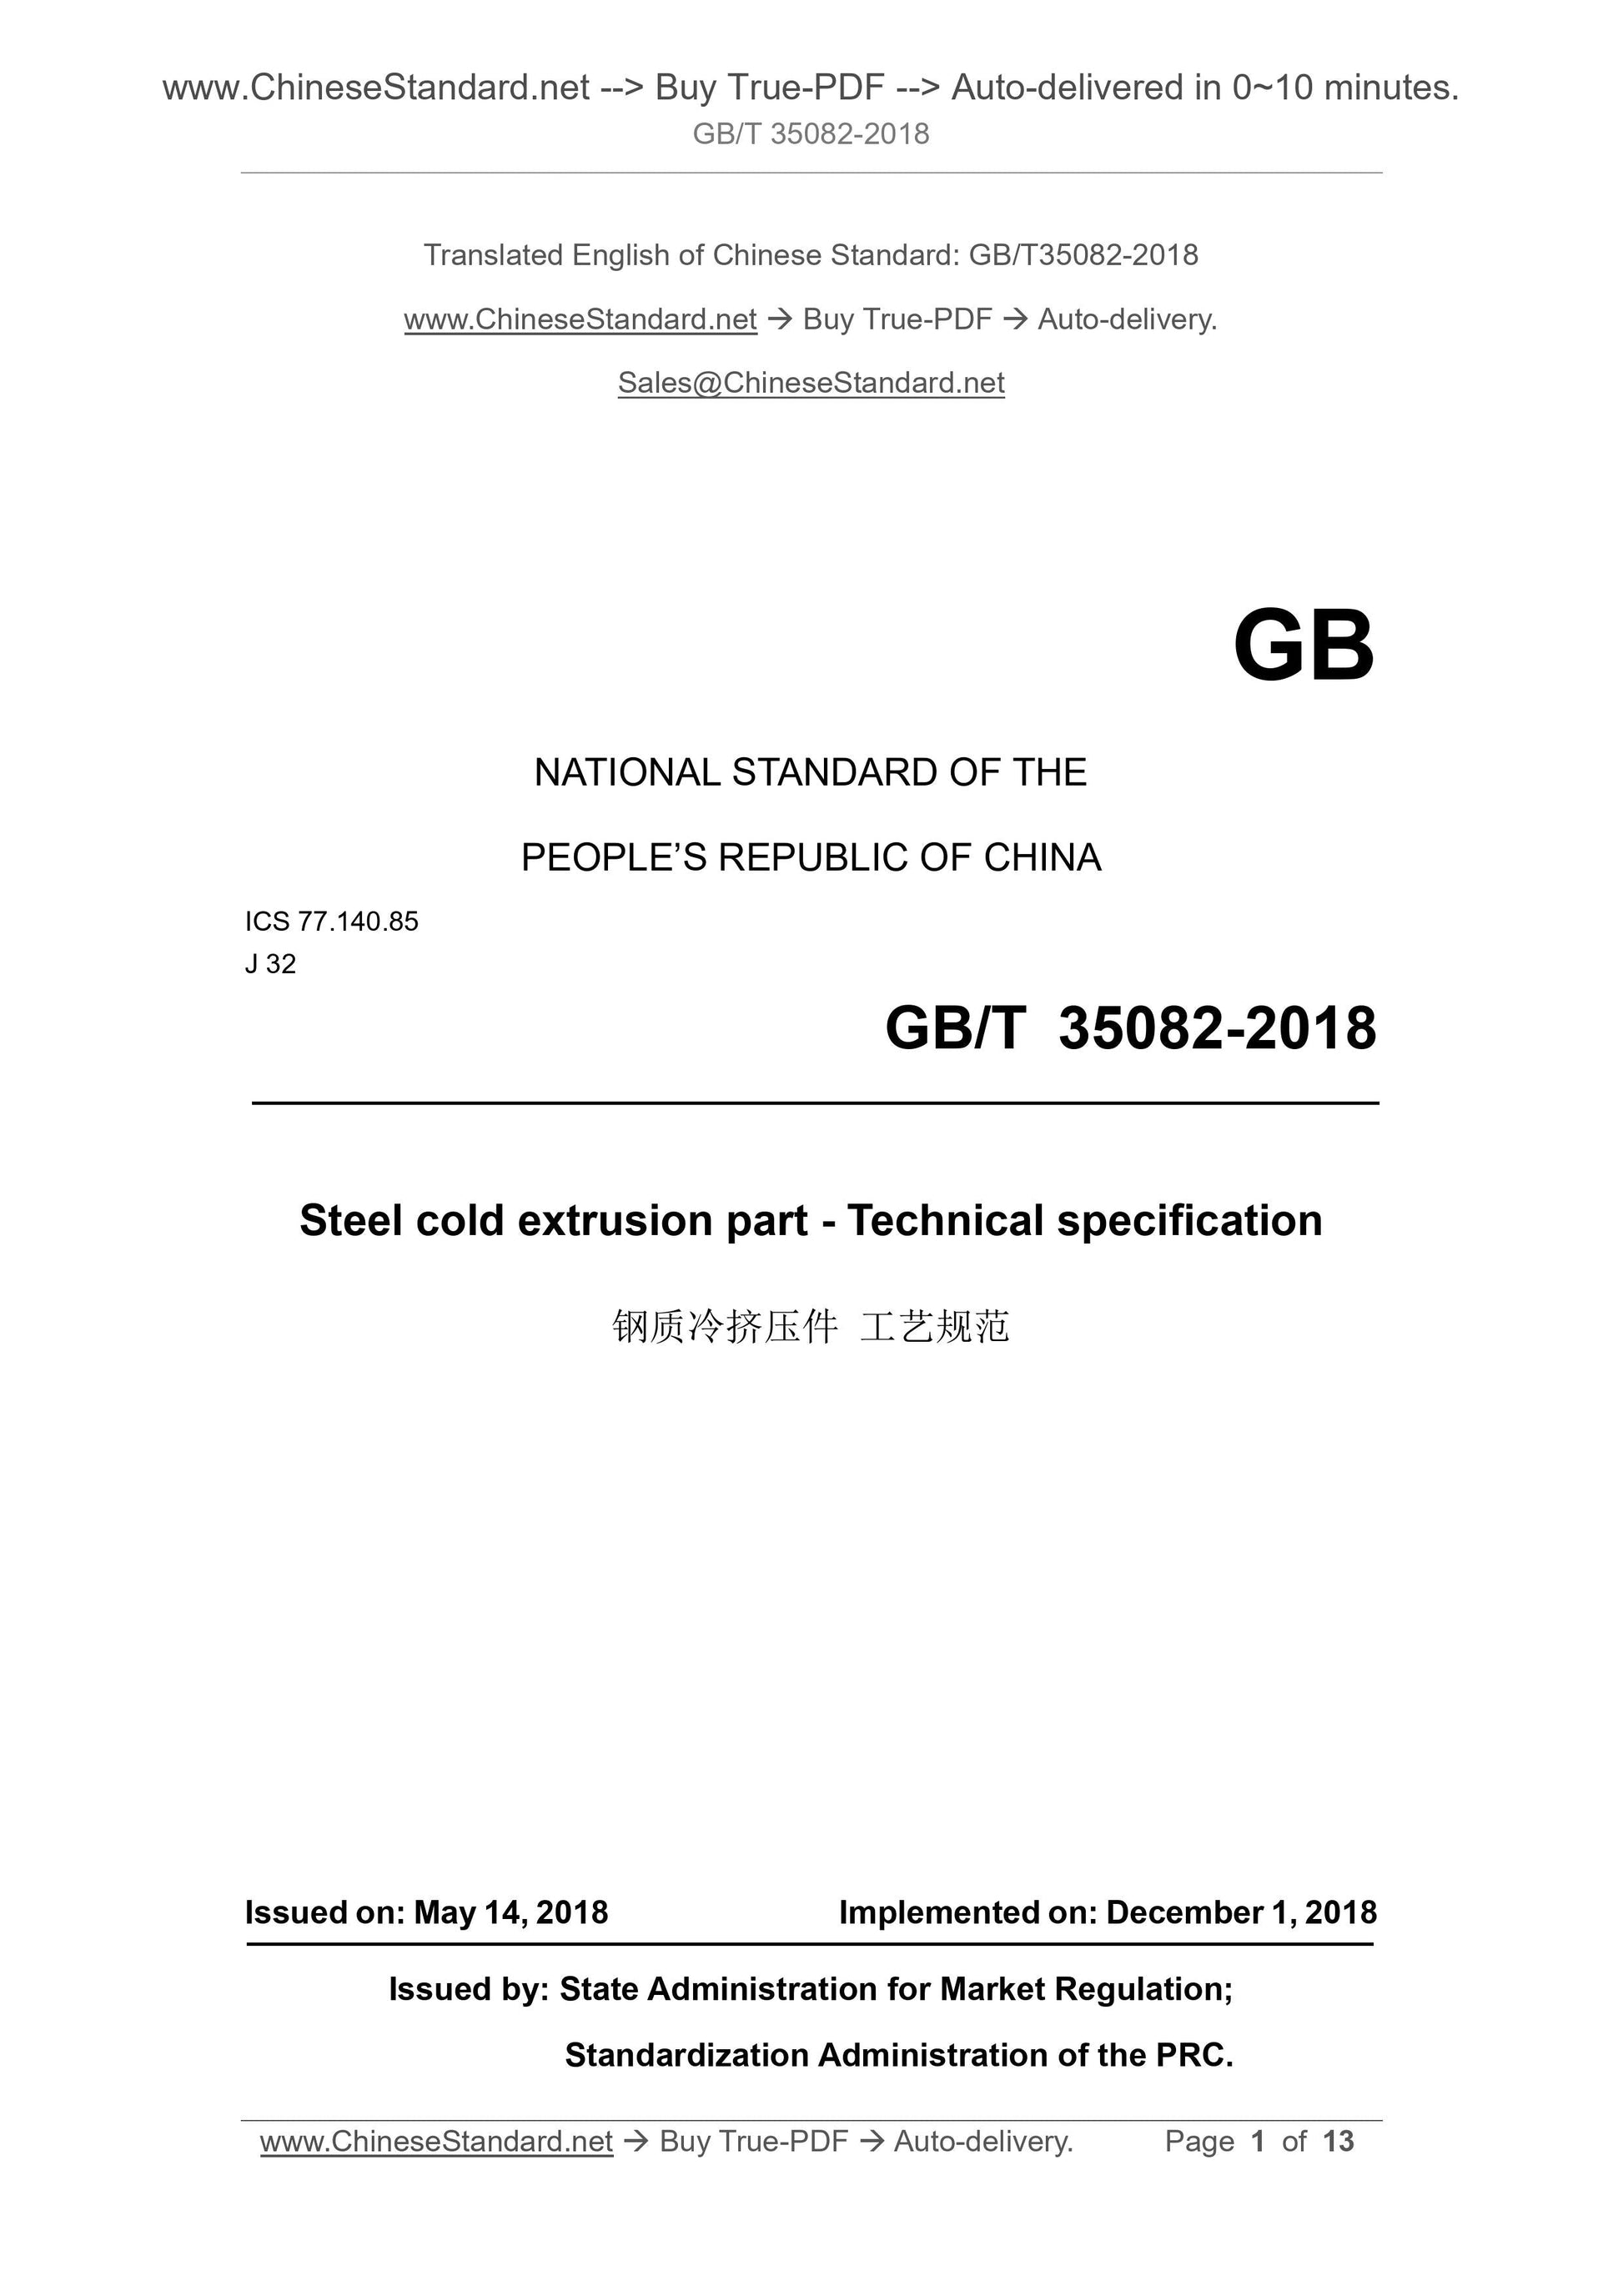 GB/T 35082-2018 Page 1